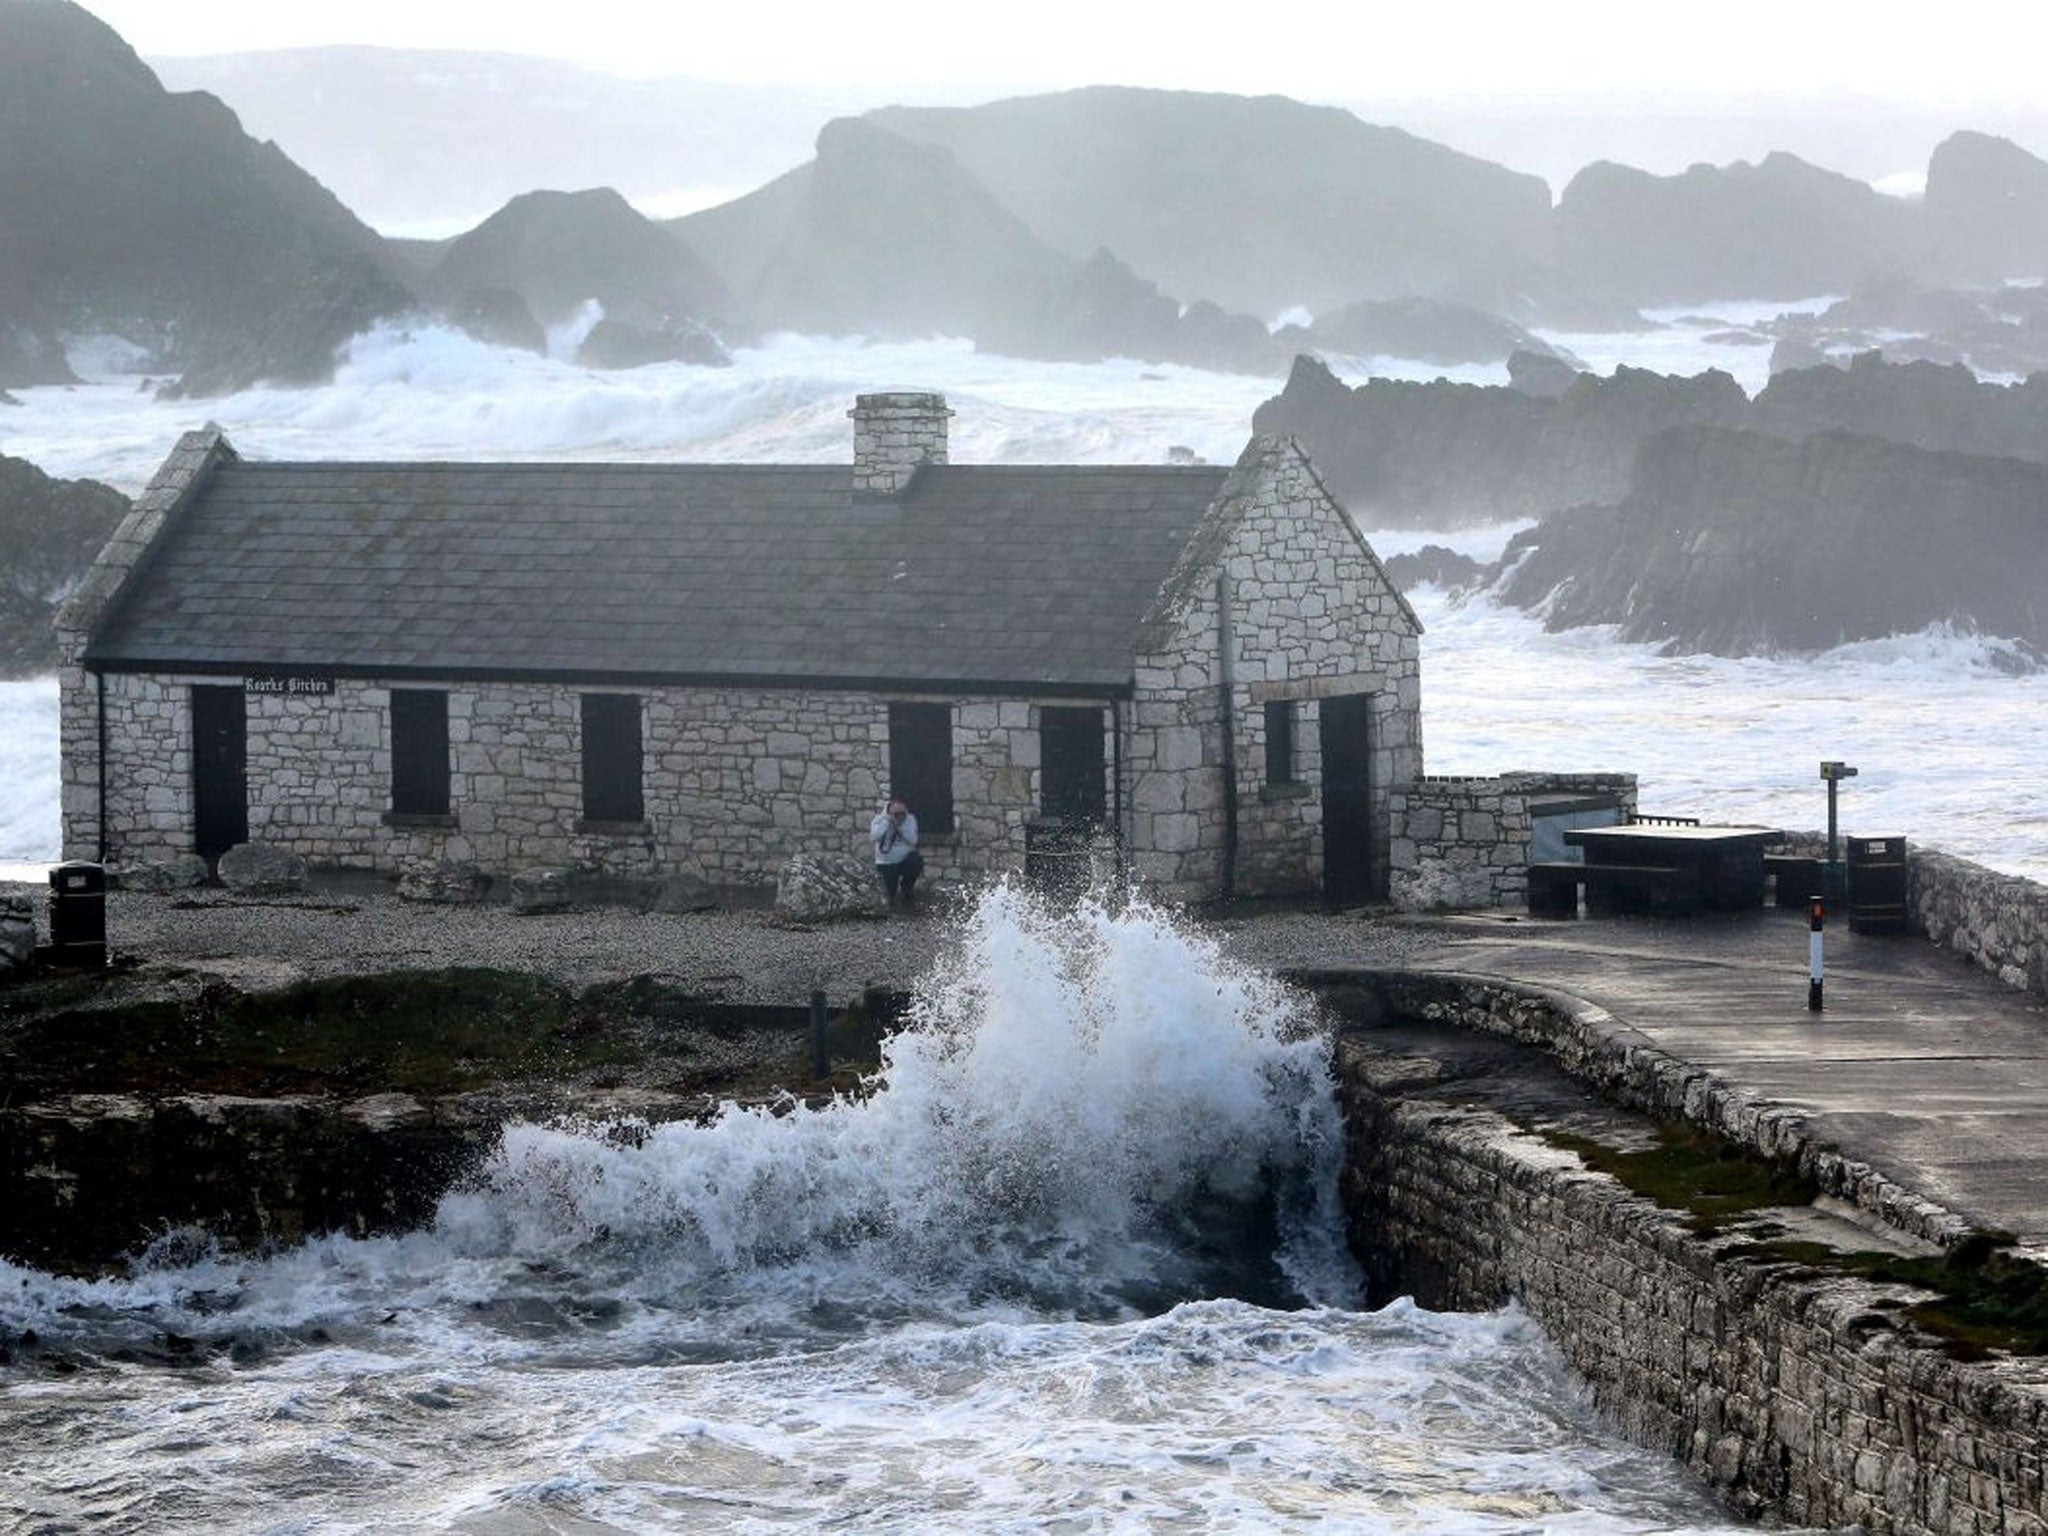 Large waves batter the harbour wall during stormy weather in Ballinto in Northern Ireland.